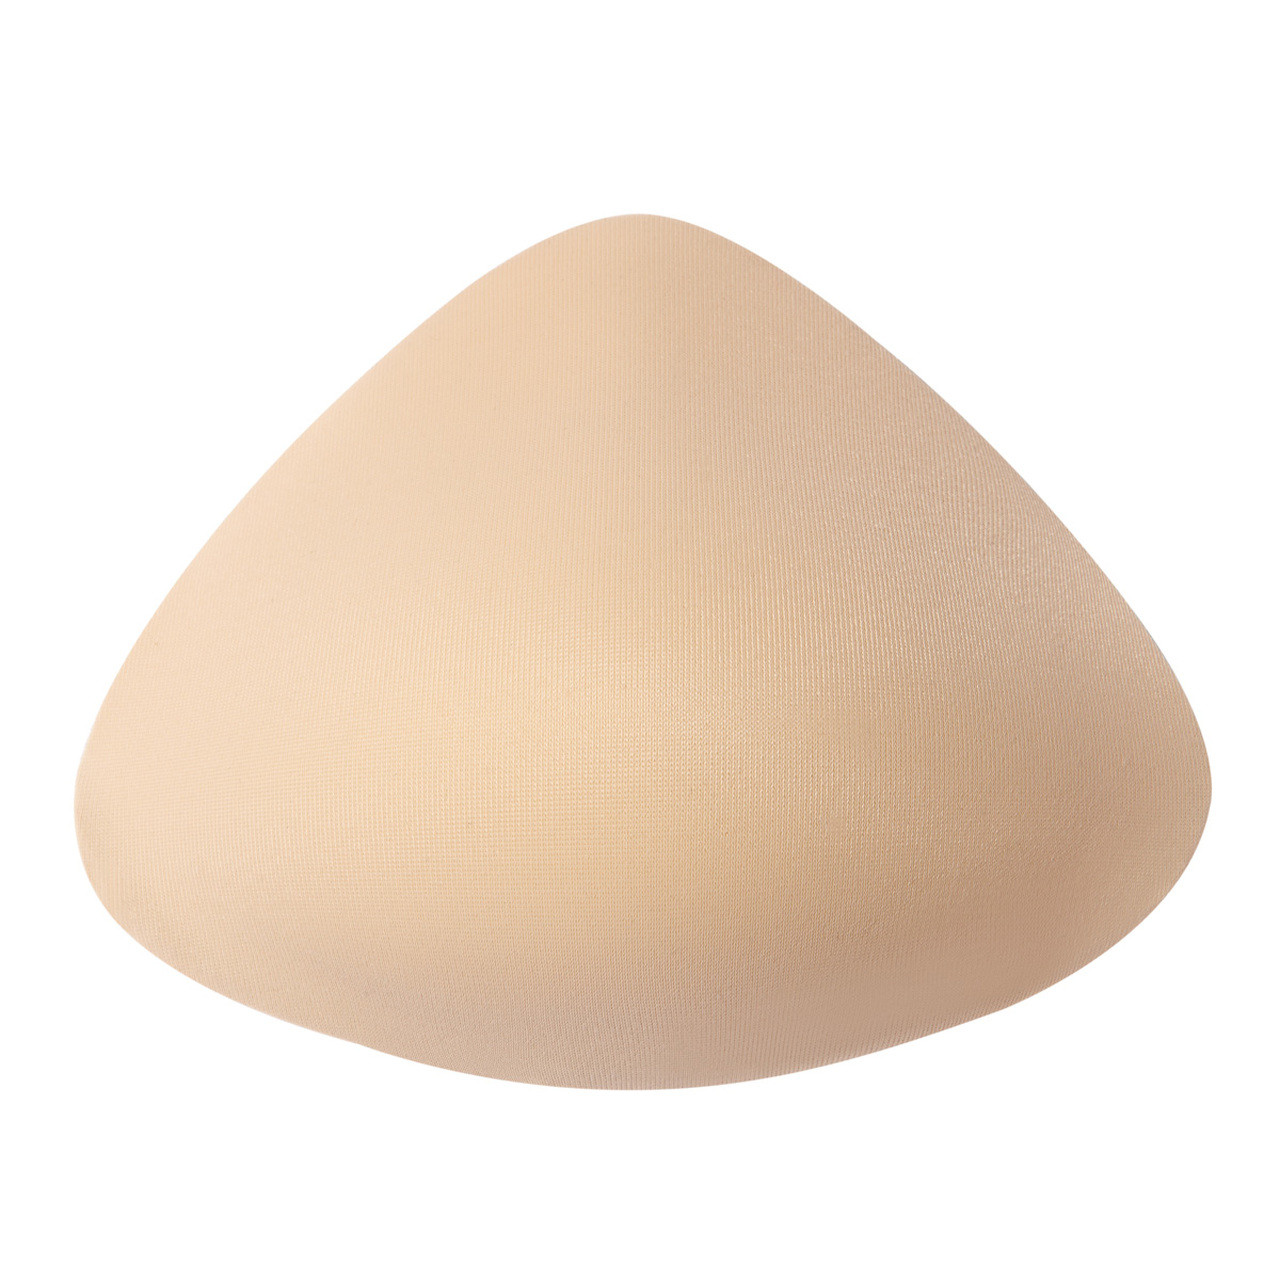 How To Make Silicone Breast Forms At Home